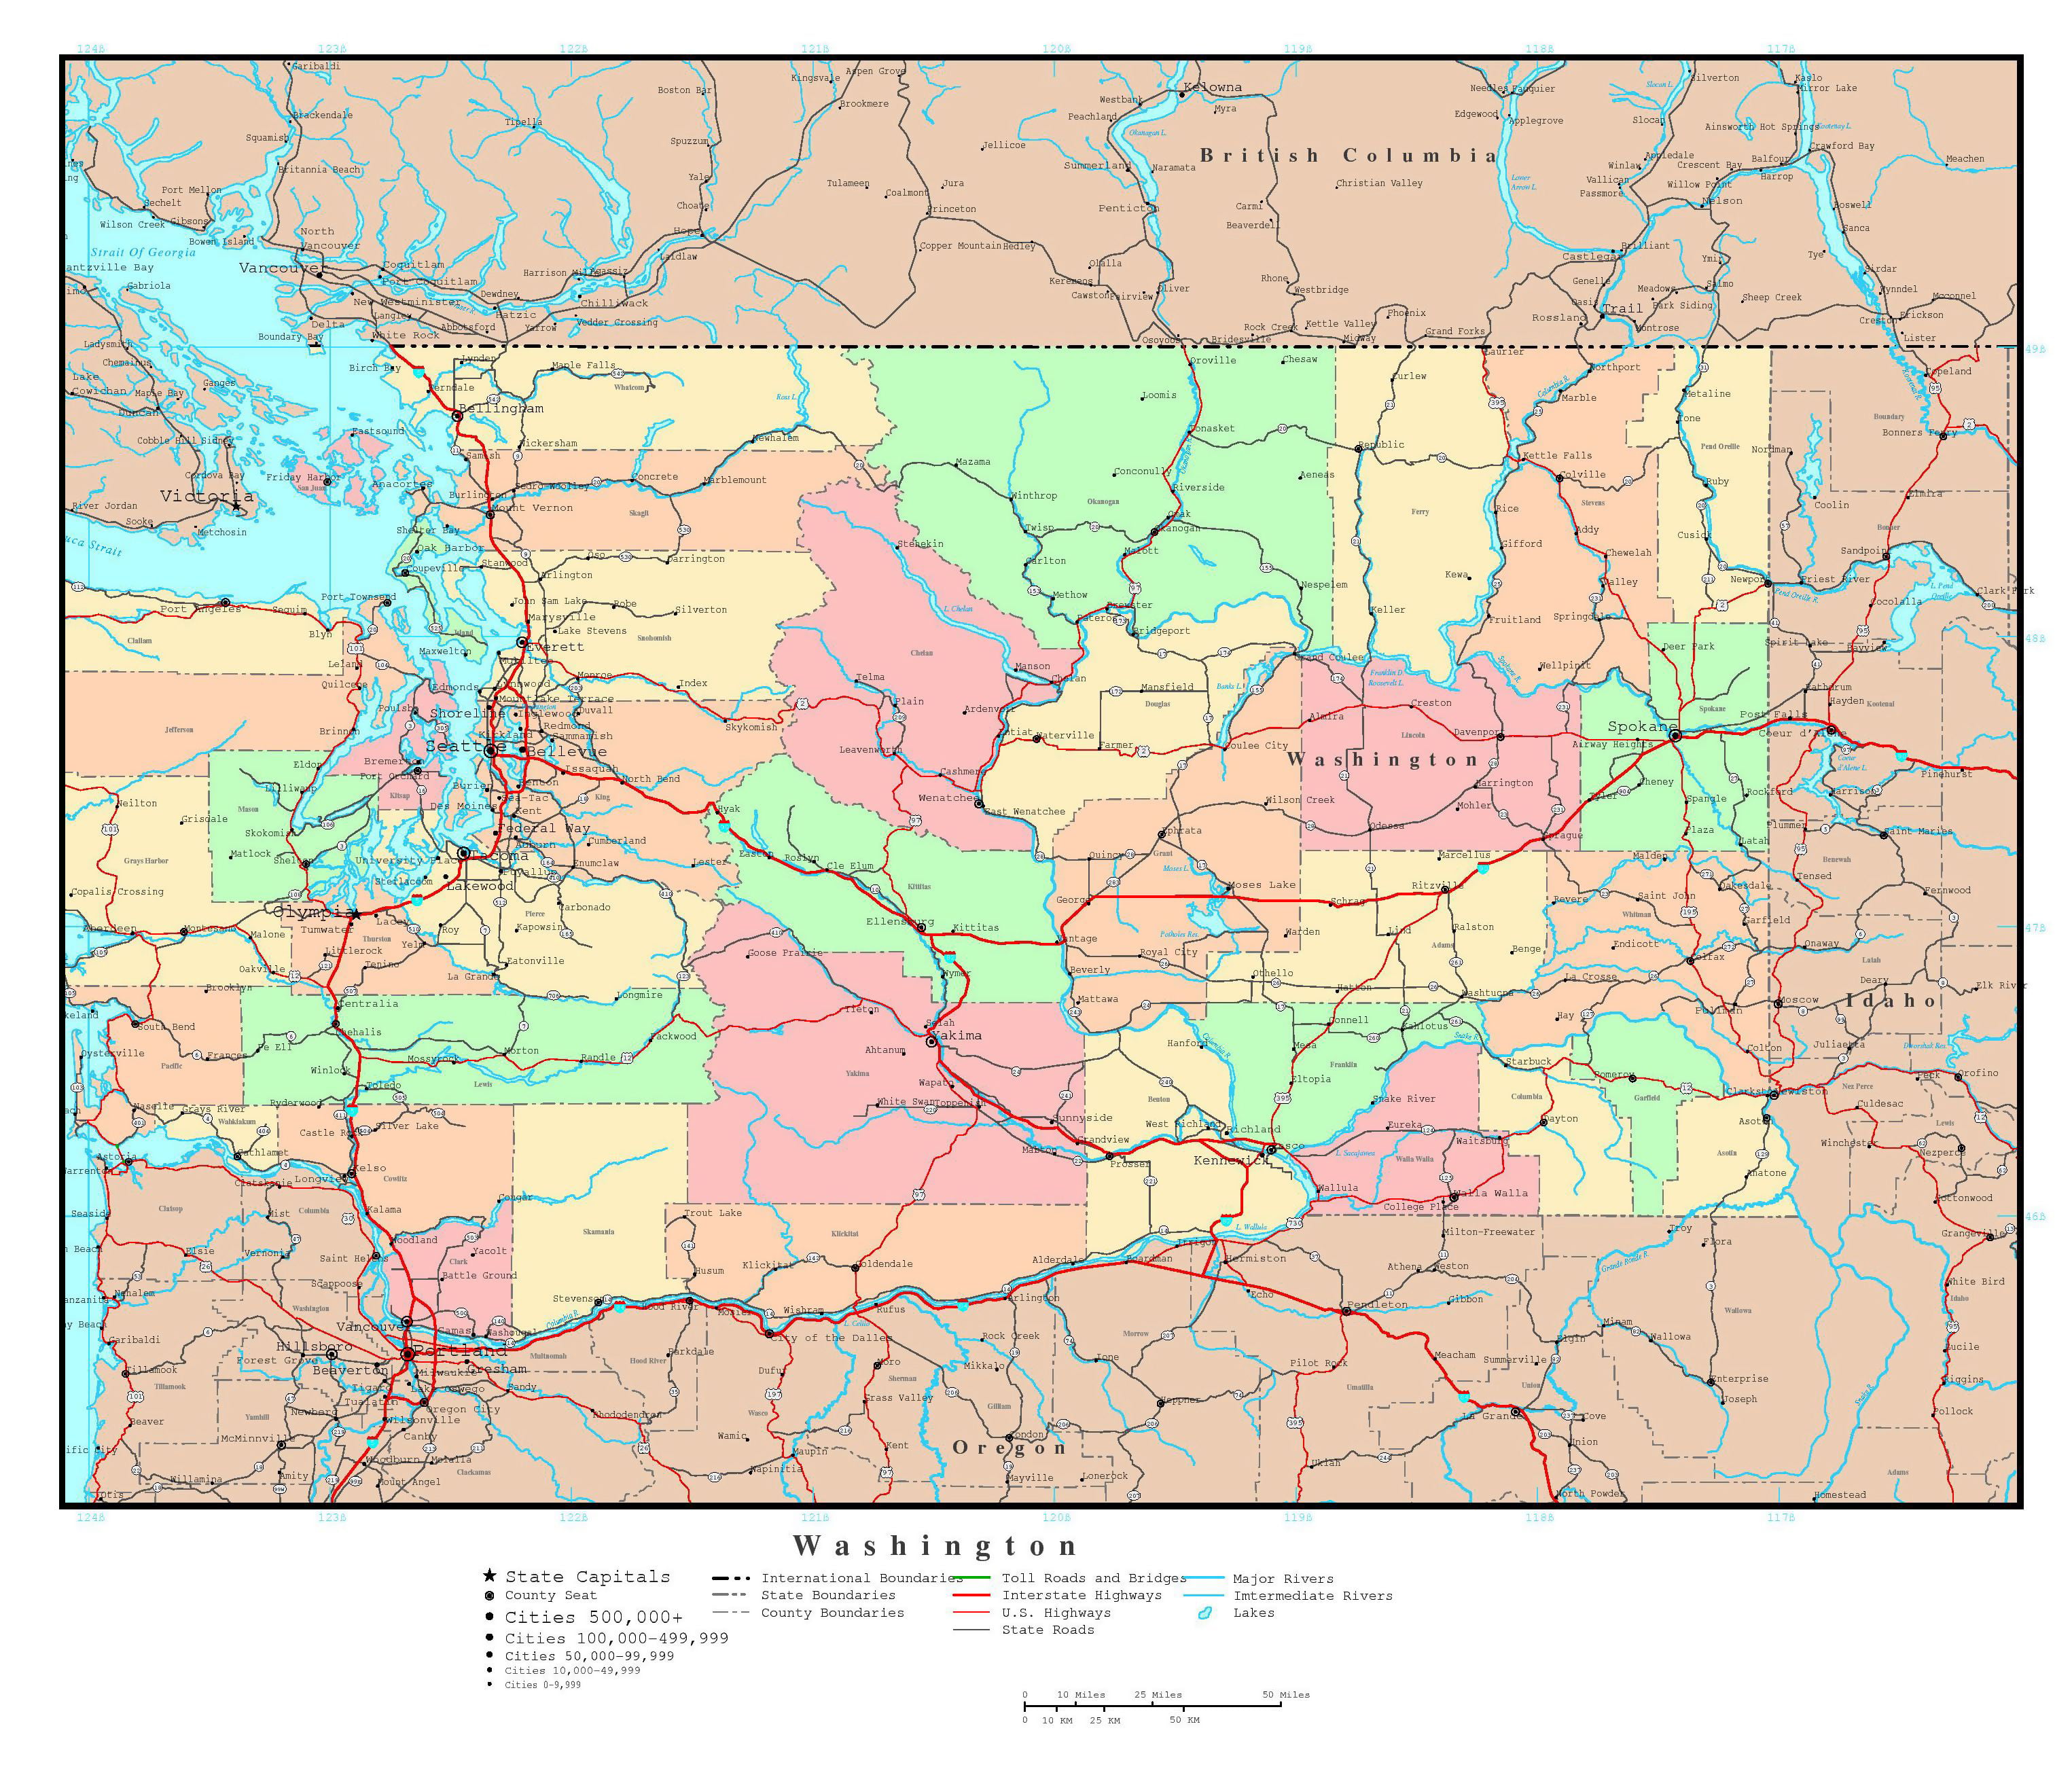 free-download-hd-laminated-map-large-detailed-administrative-map-of